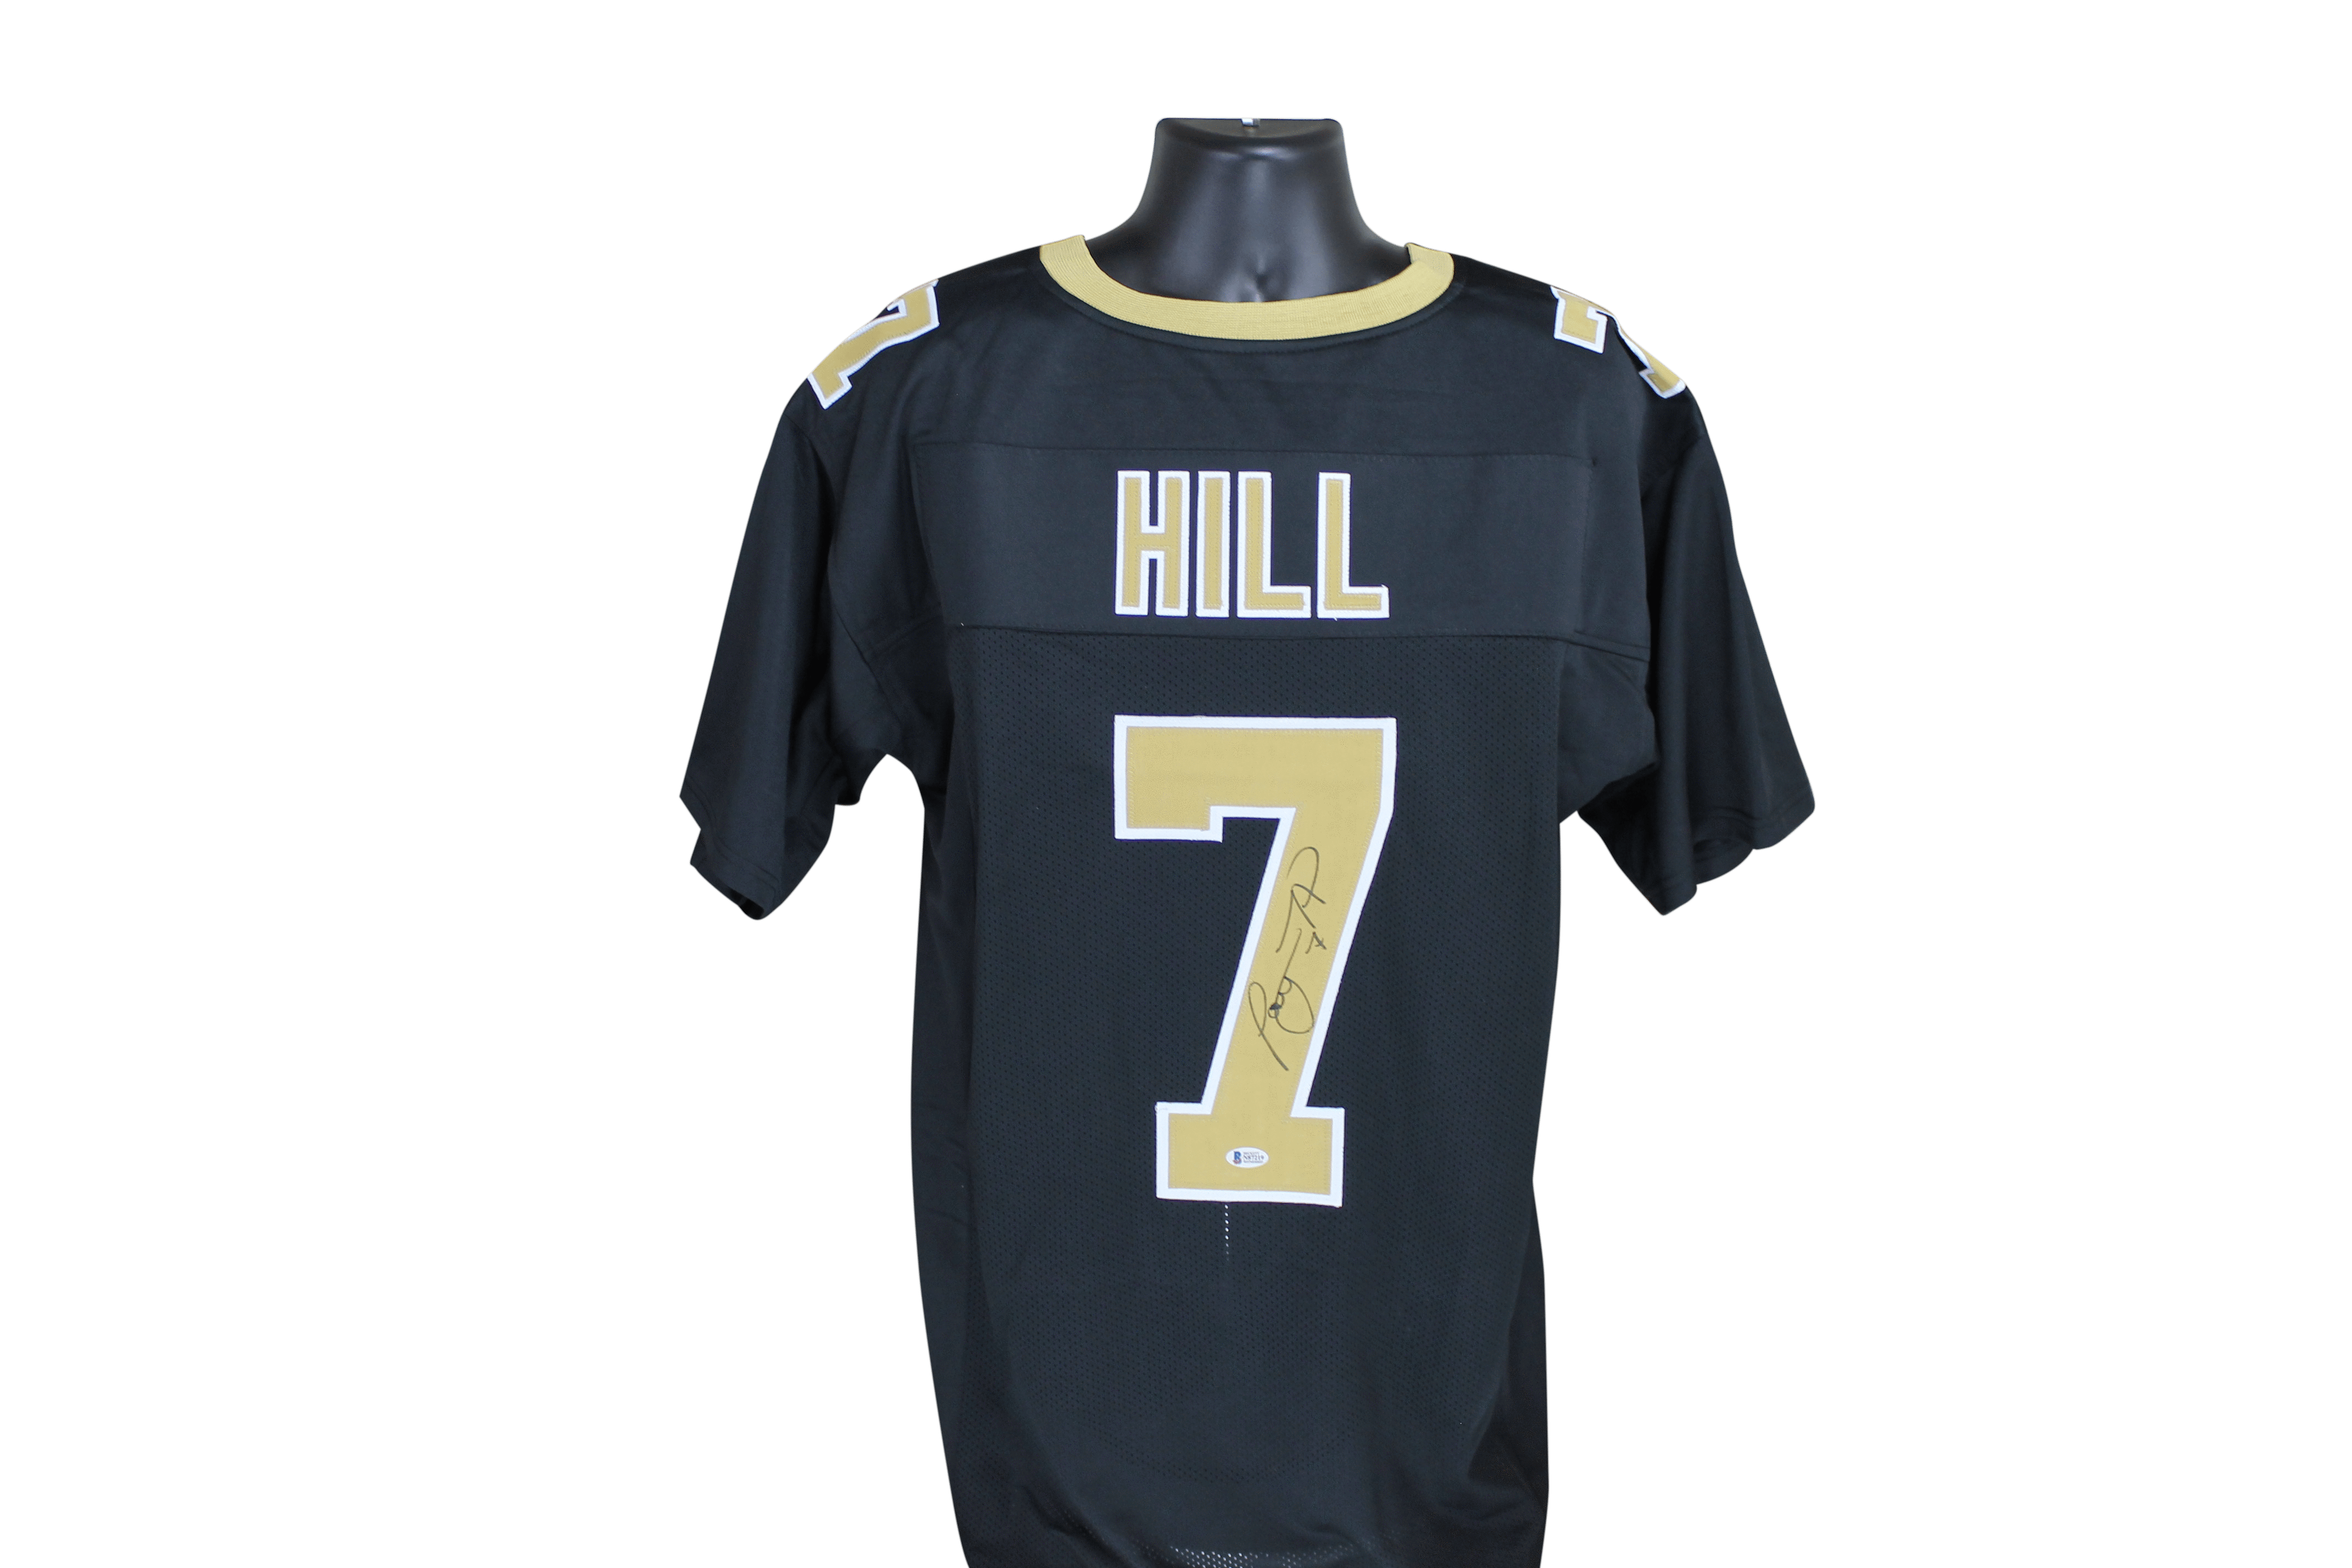 new orleans saints taysom hill jersey